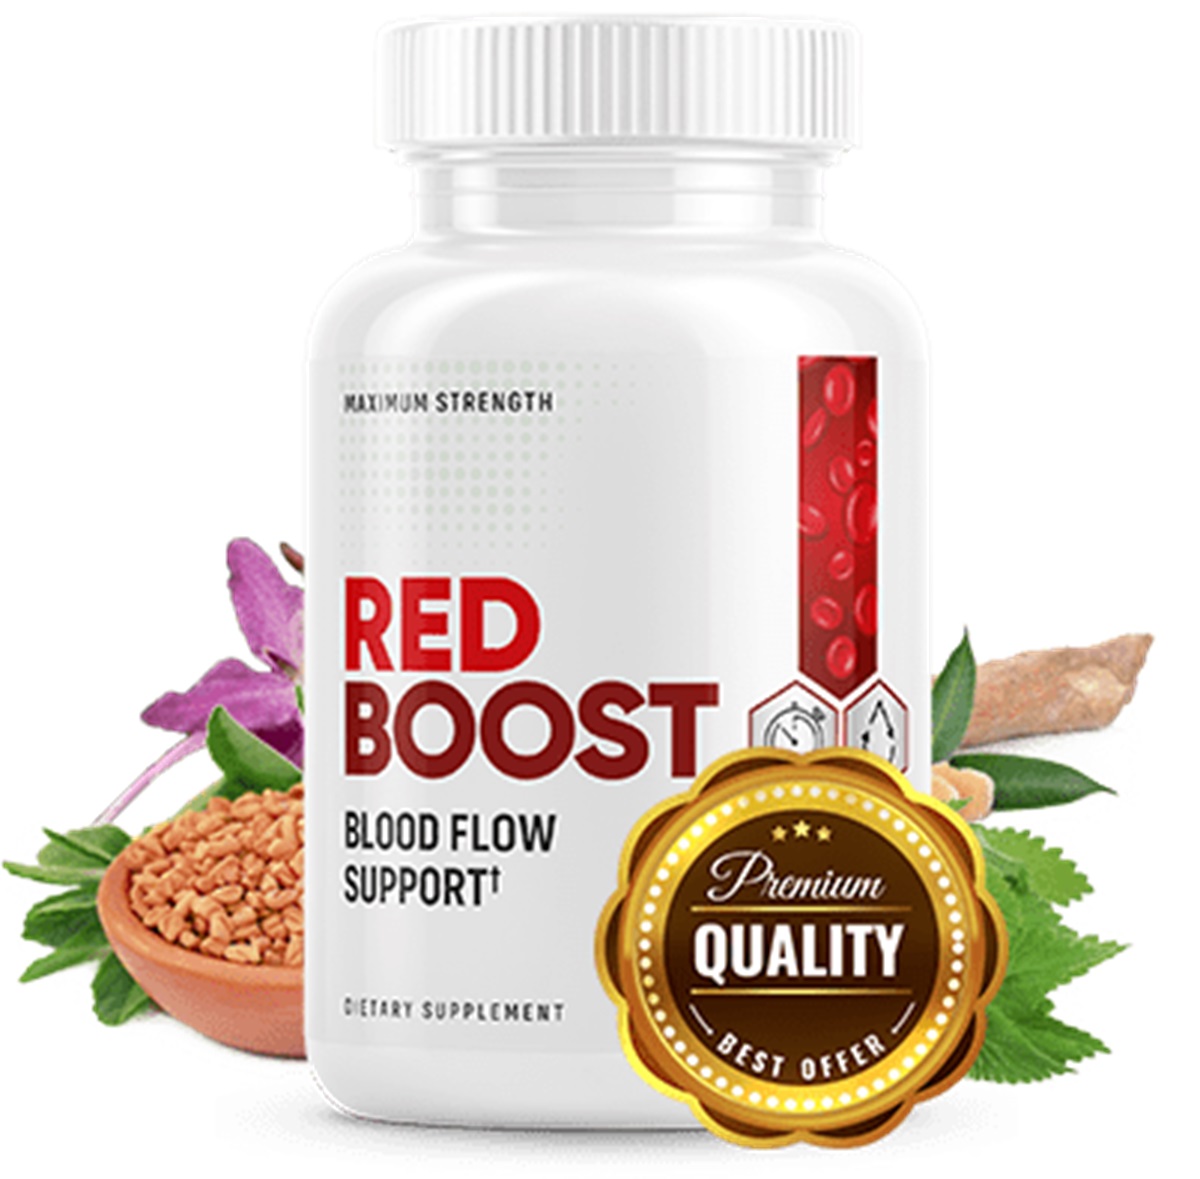 Red Boost is a supplement made with a natural formula to support blood flow in men. All ingredients used in the Red Boost formula have been scientifically tested.